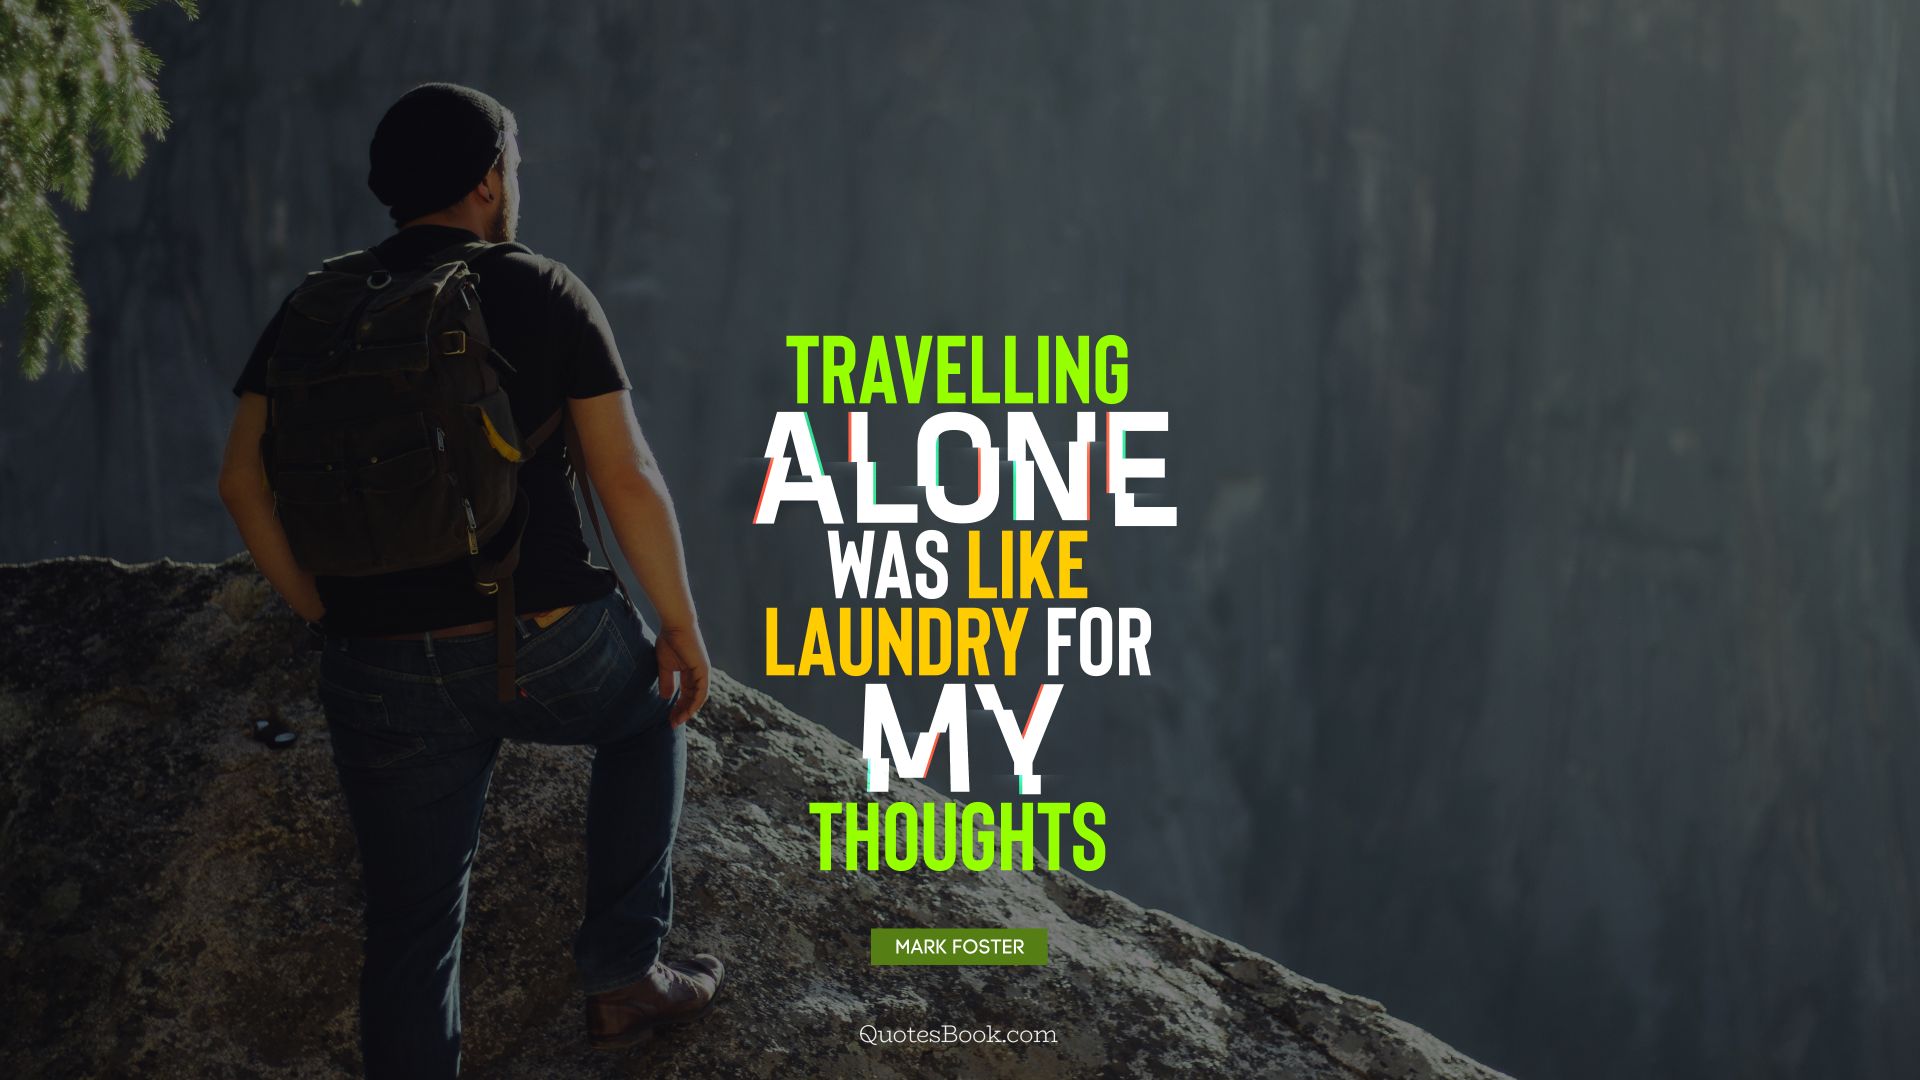 Travelling alone was like laundry for my thoughts. - Quote by Mark Foster